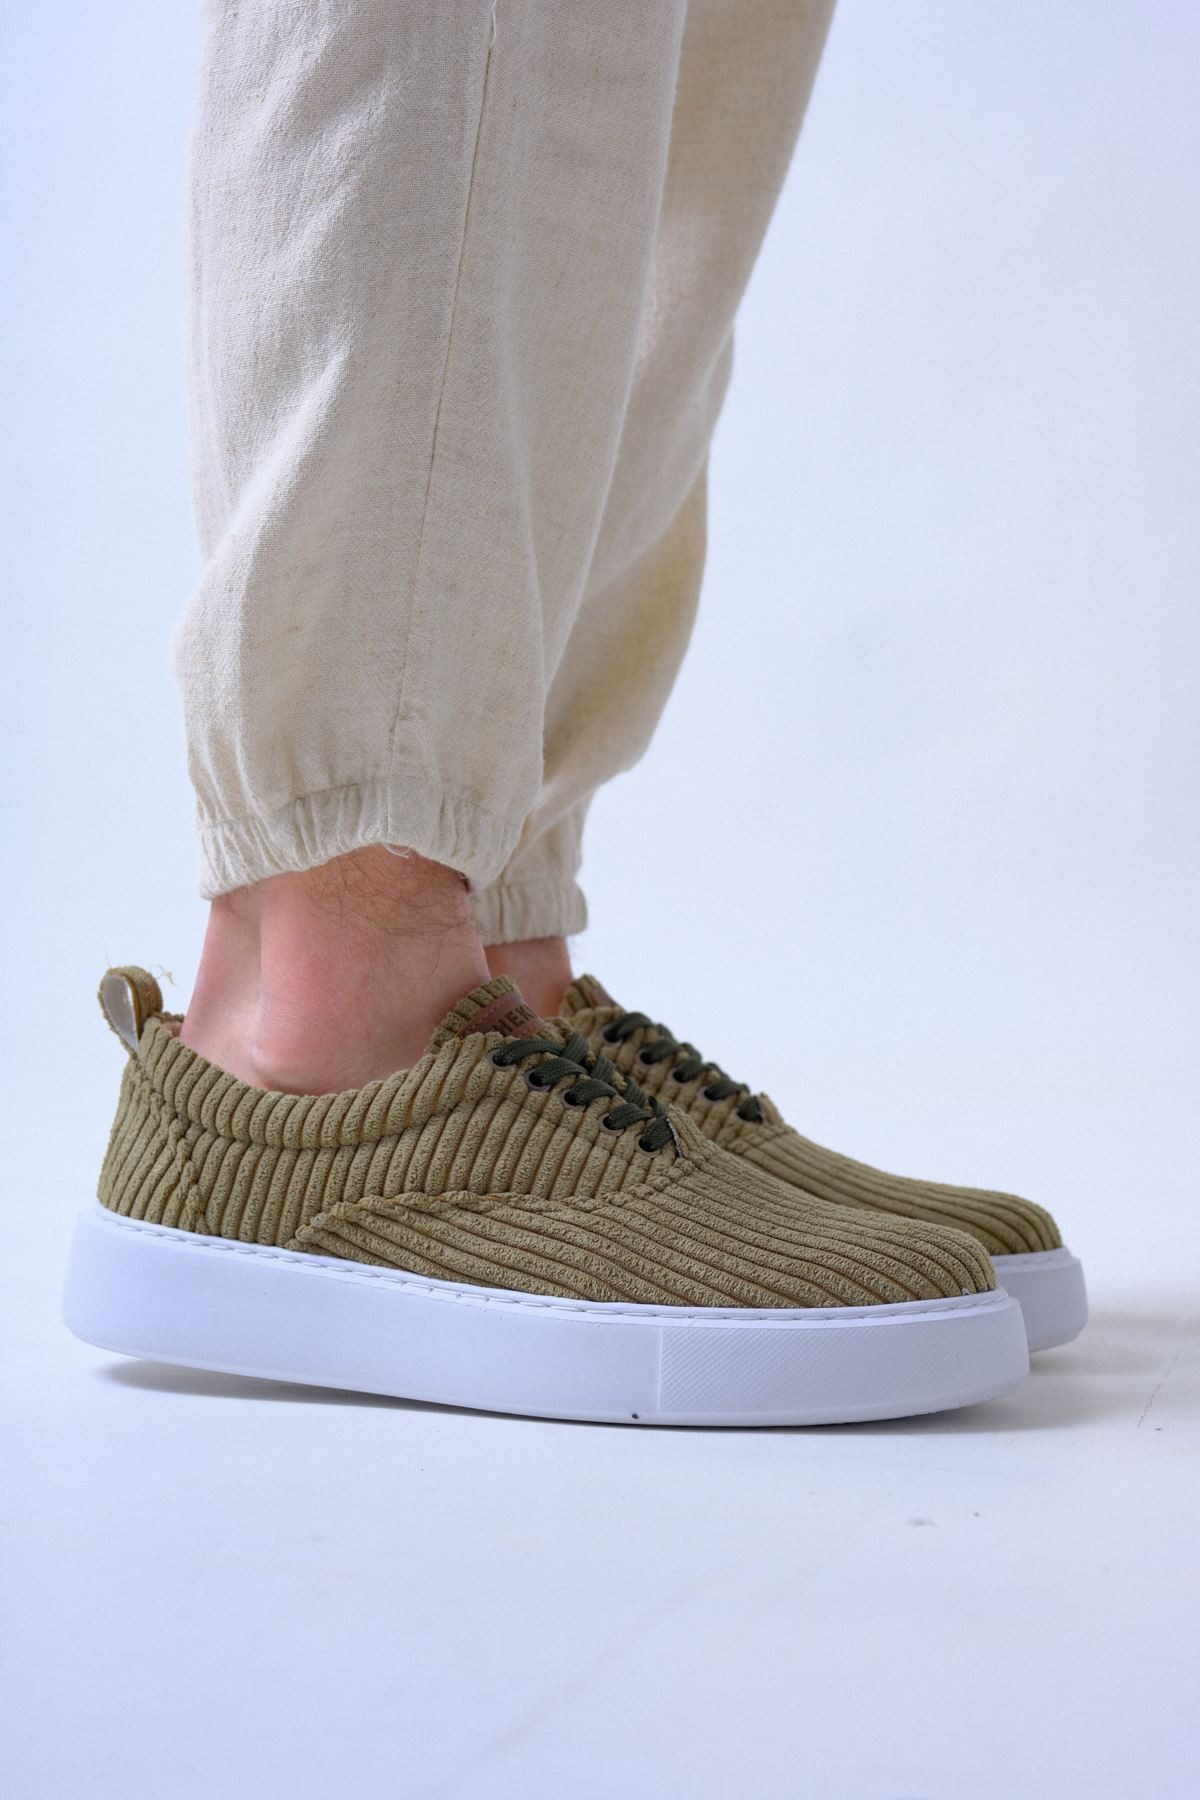 Chekich Men's Shoes Beige Color Lace-up Closure Mesh Fabric Material Comfortable Sole Breathable Daily Flexible Sneakers CH173